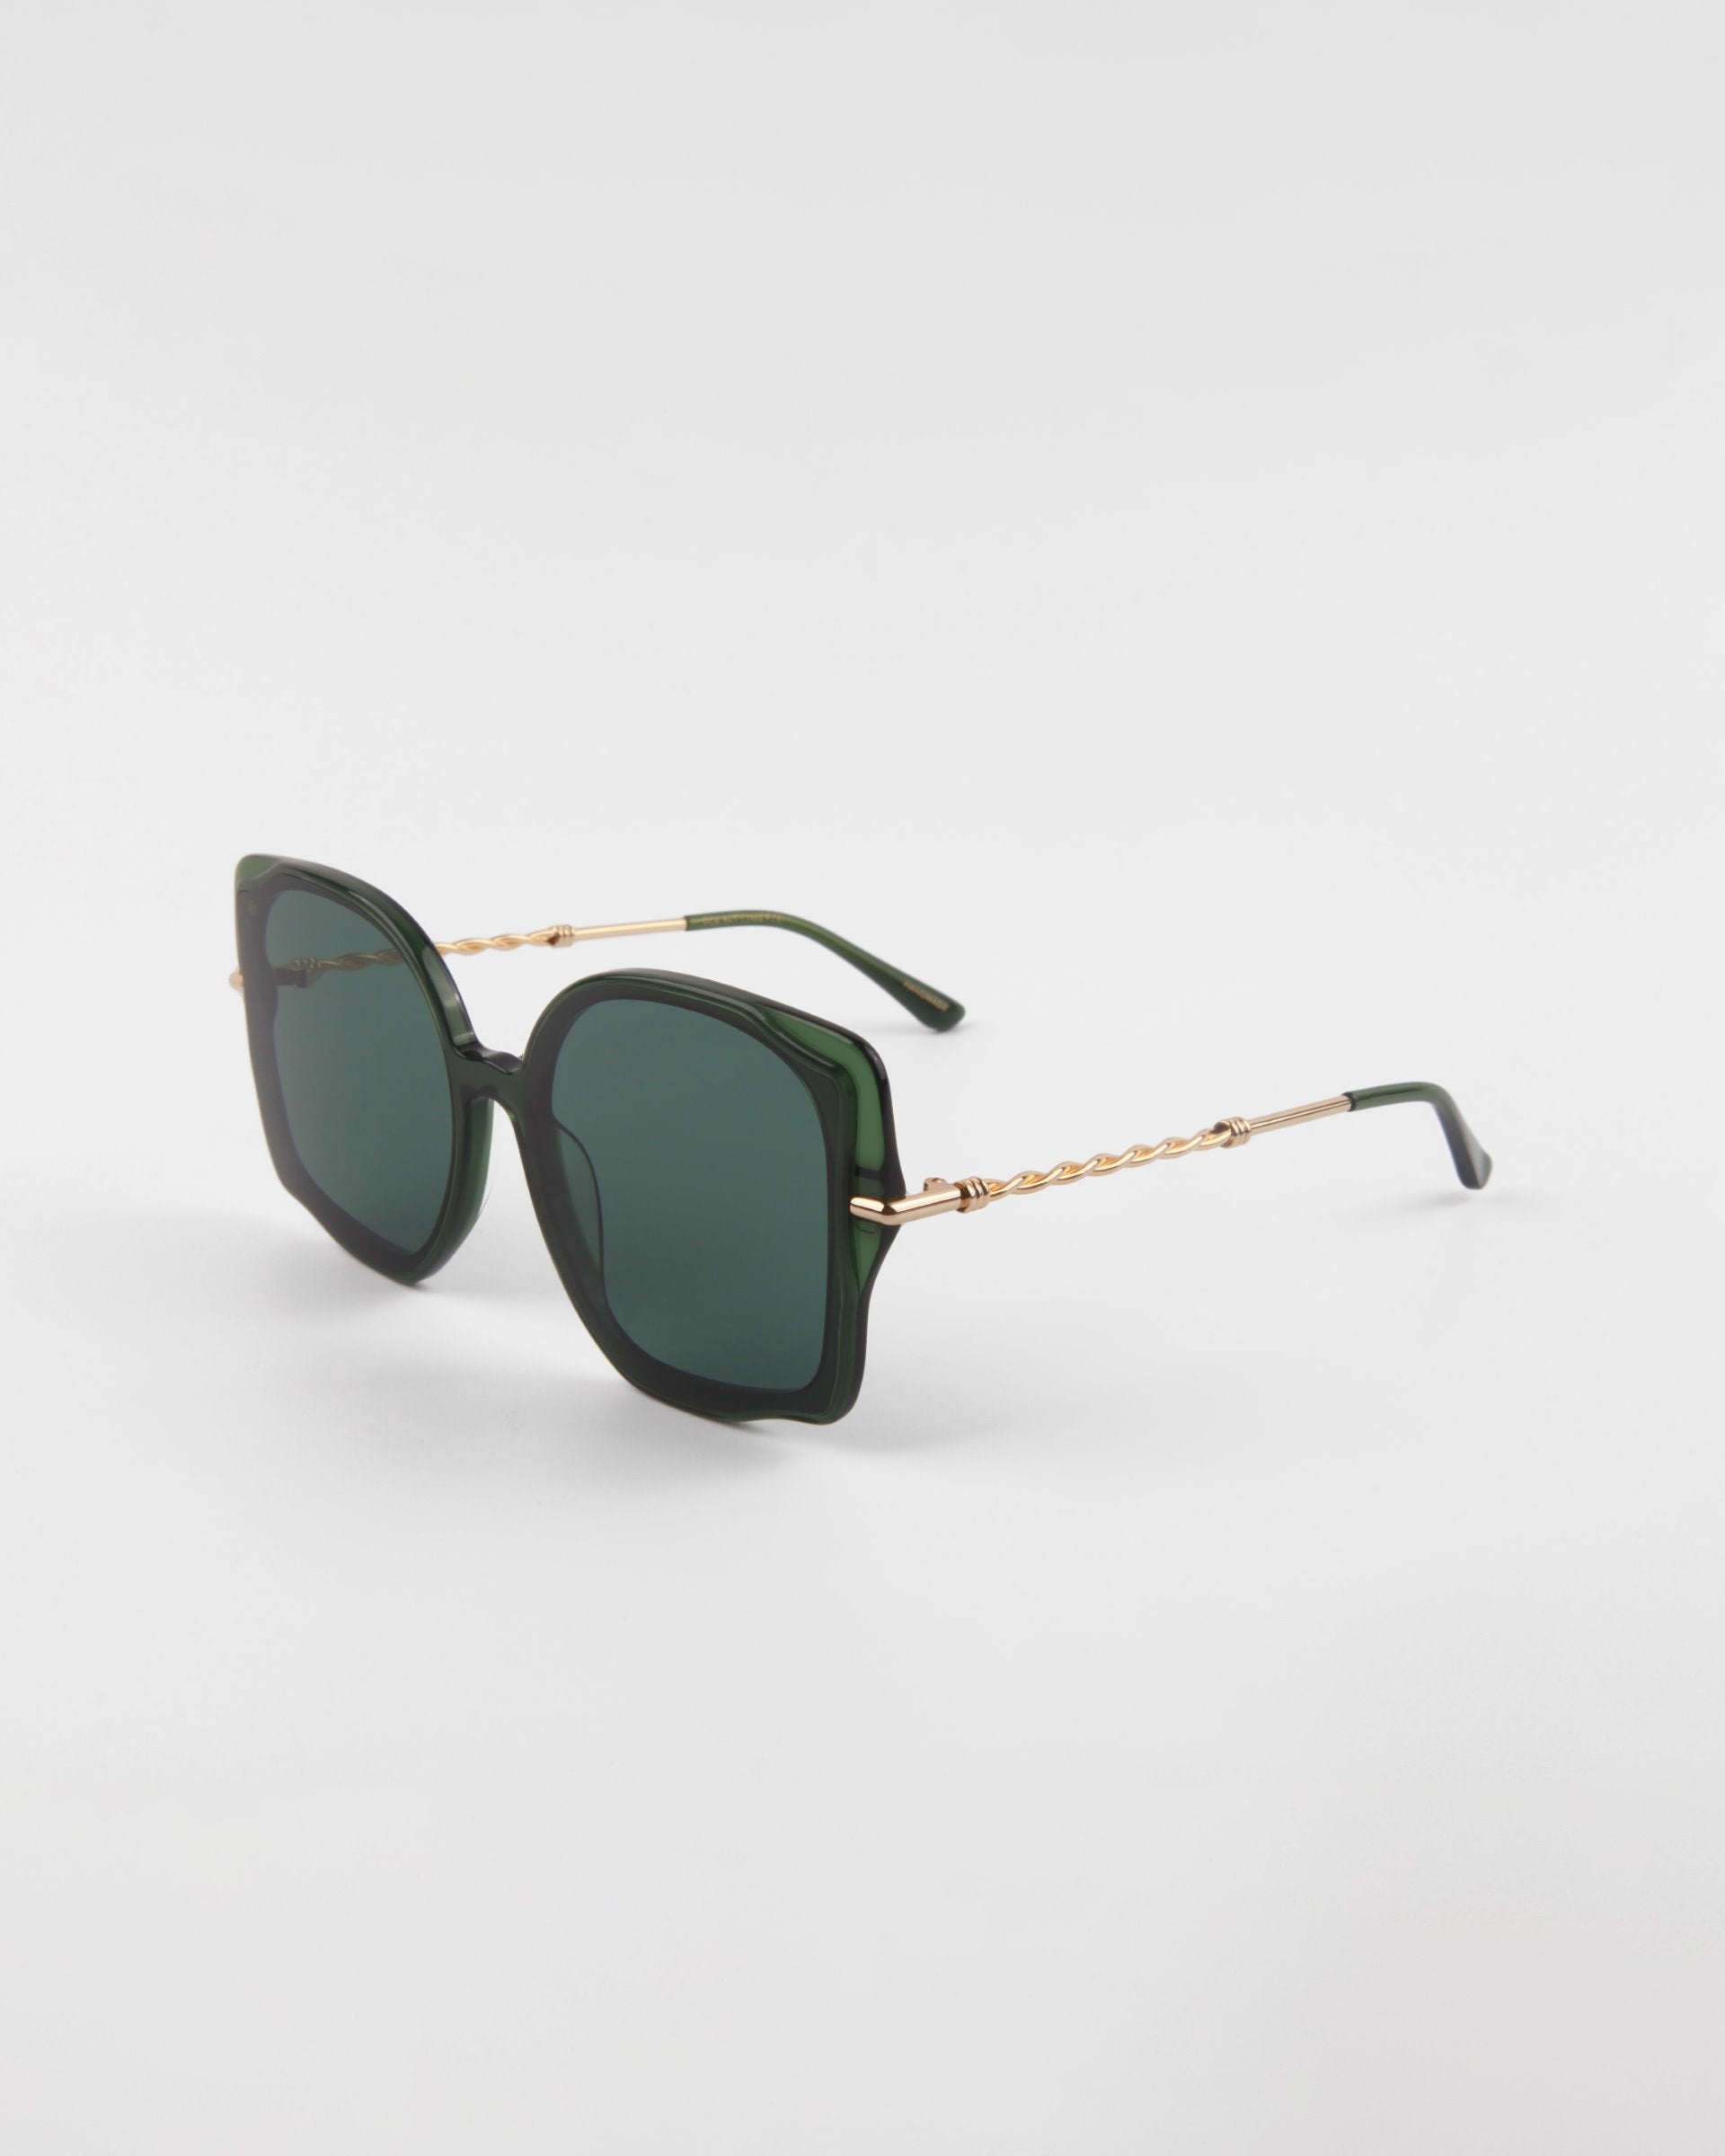 A pair of stylish, oversized square-shaped For Art&#39;s Sake® Fahrenheit sunglasses with dark green lenses and matching green frames. The temples feature 18-karat gold-plated chain detail connecting to the green earpieces, adding an elegant touch to the design. The handmade acetate sunglasses are displayed on a plain white background.